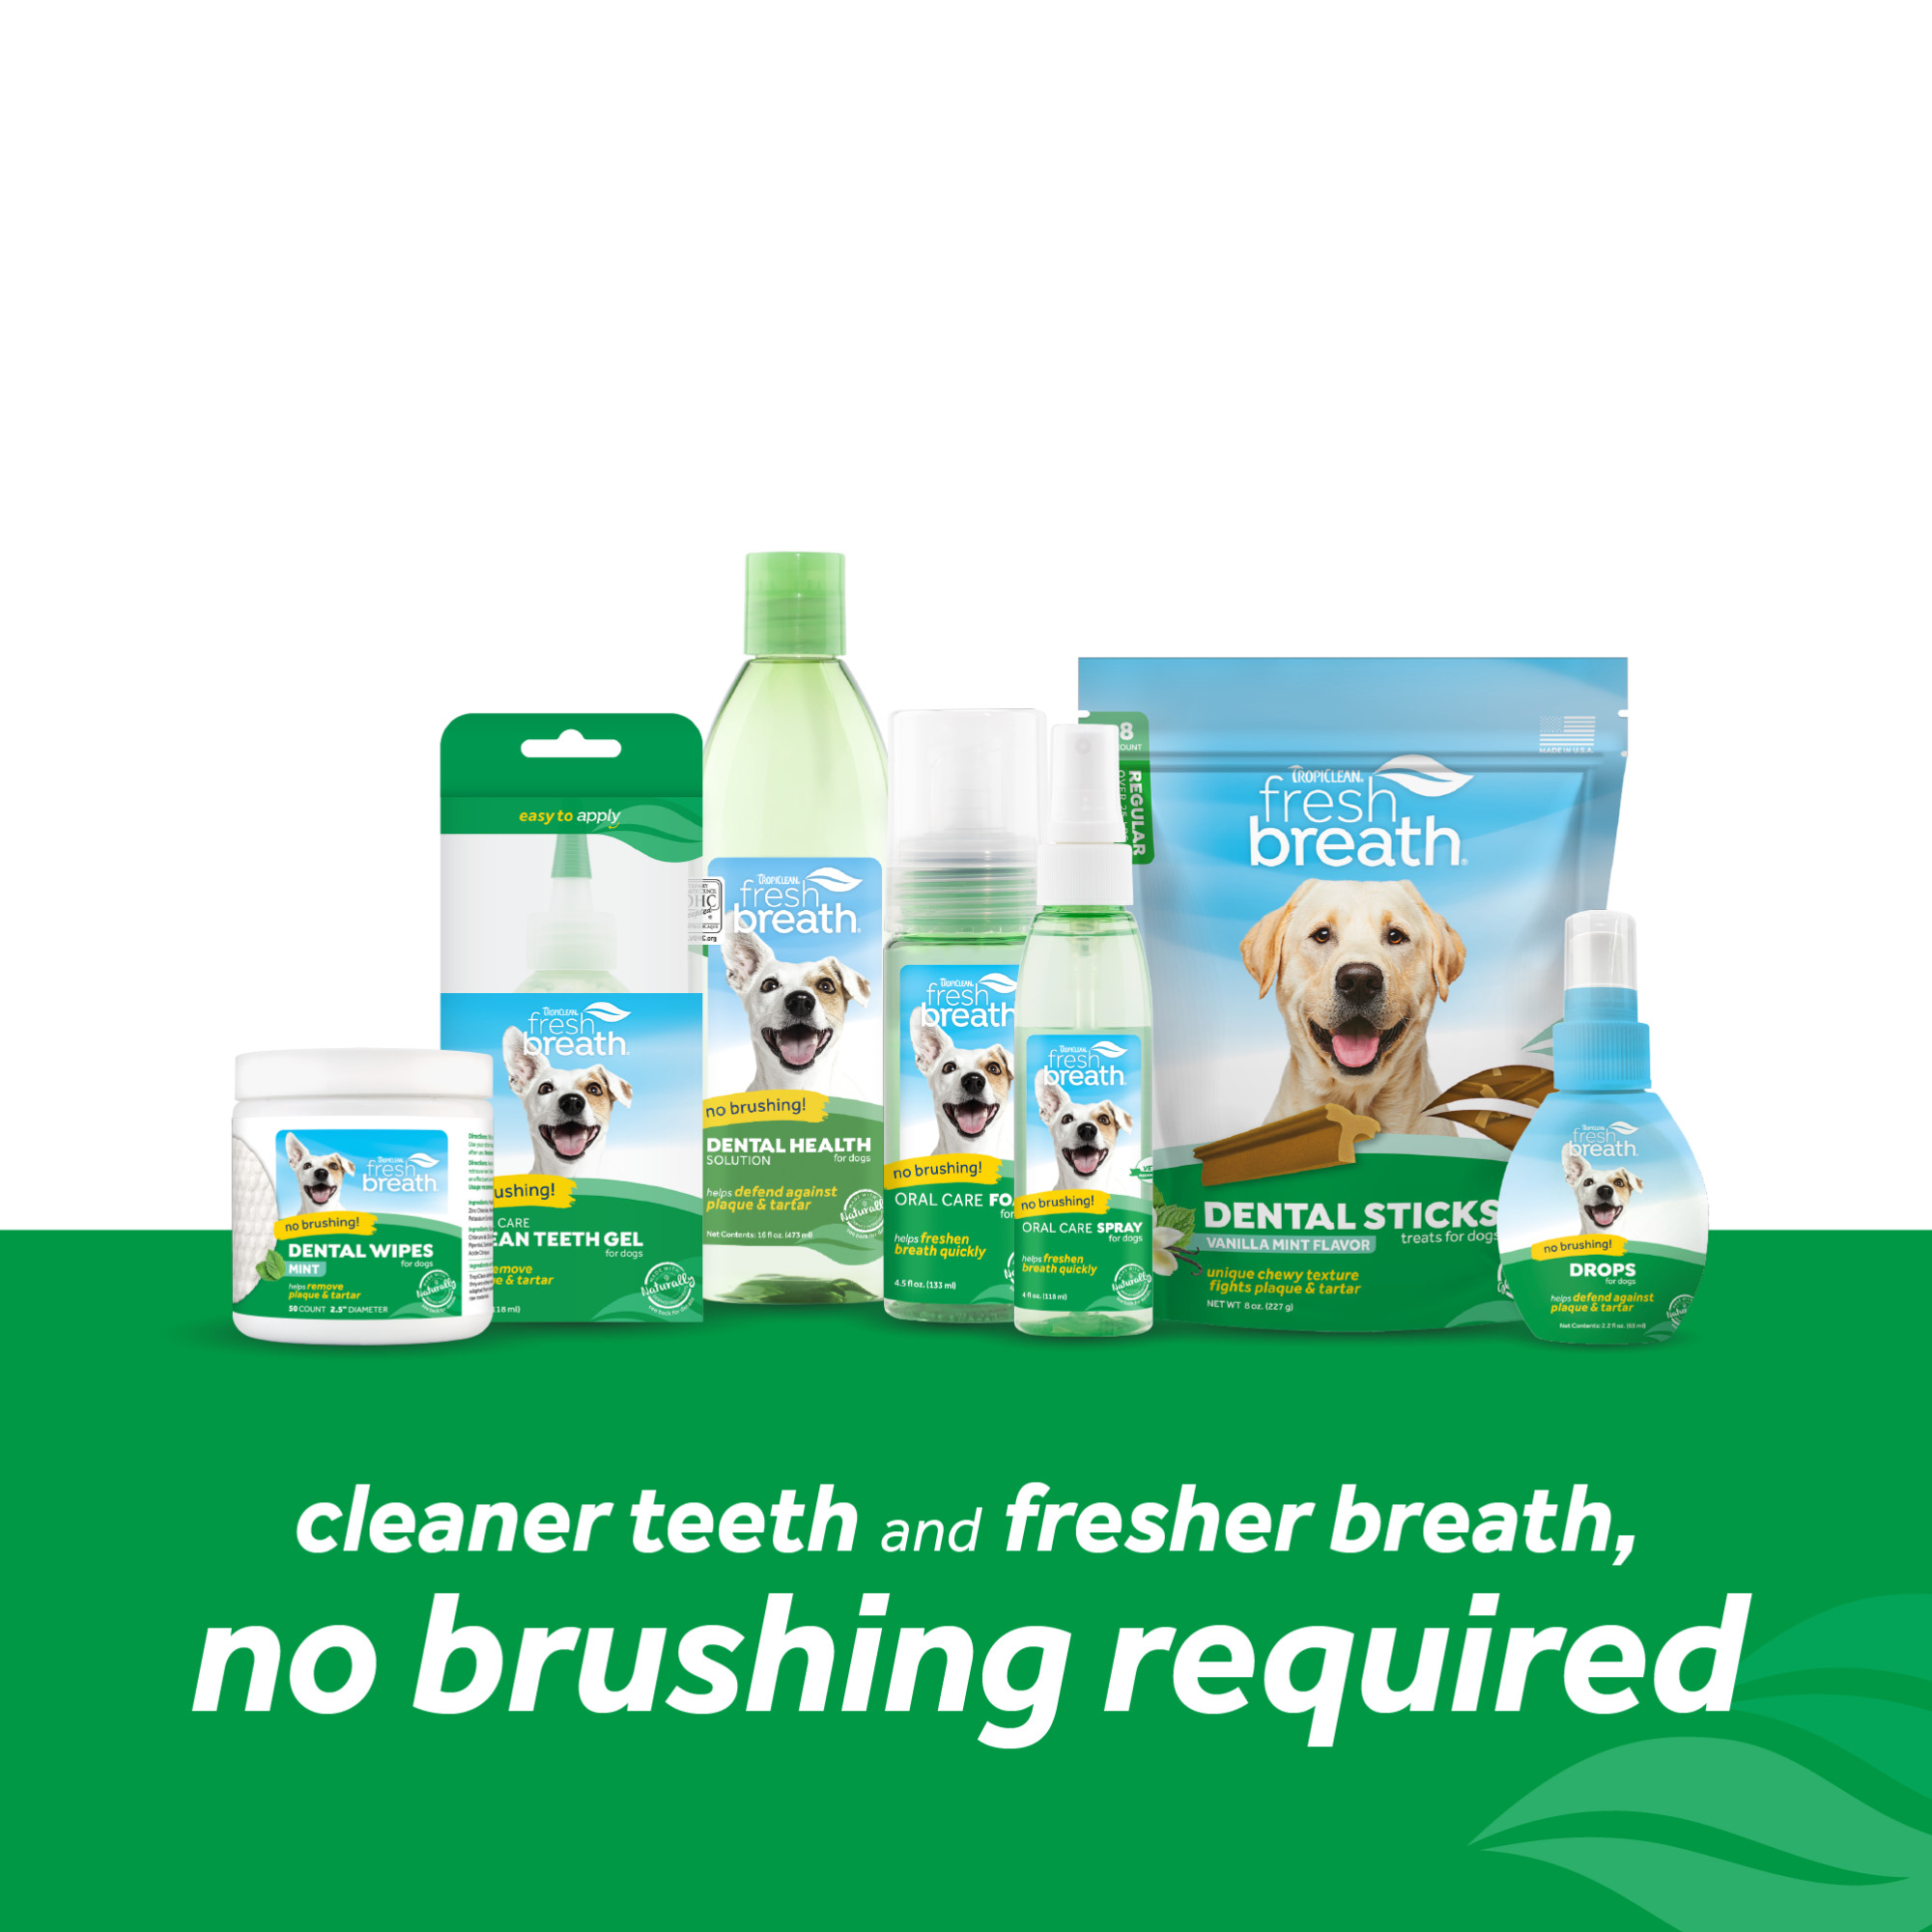 Dental Health Solution Plus Supports Skin Health for Dogs